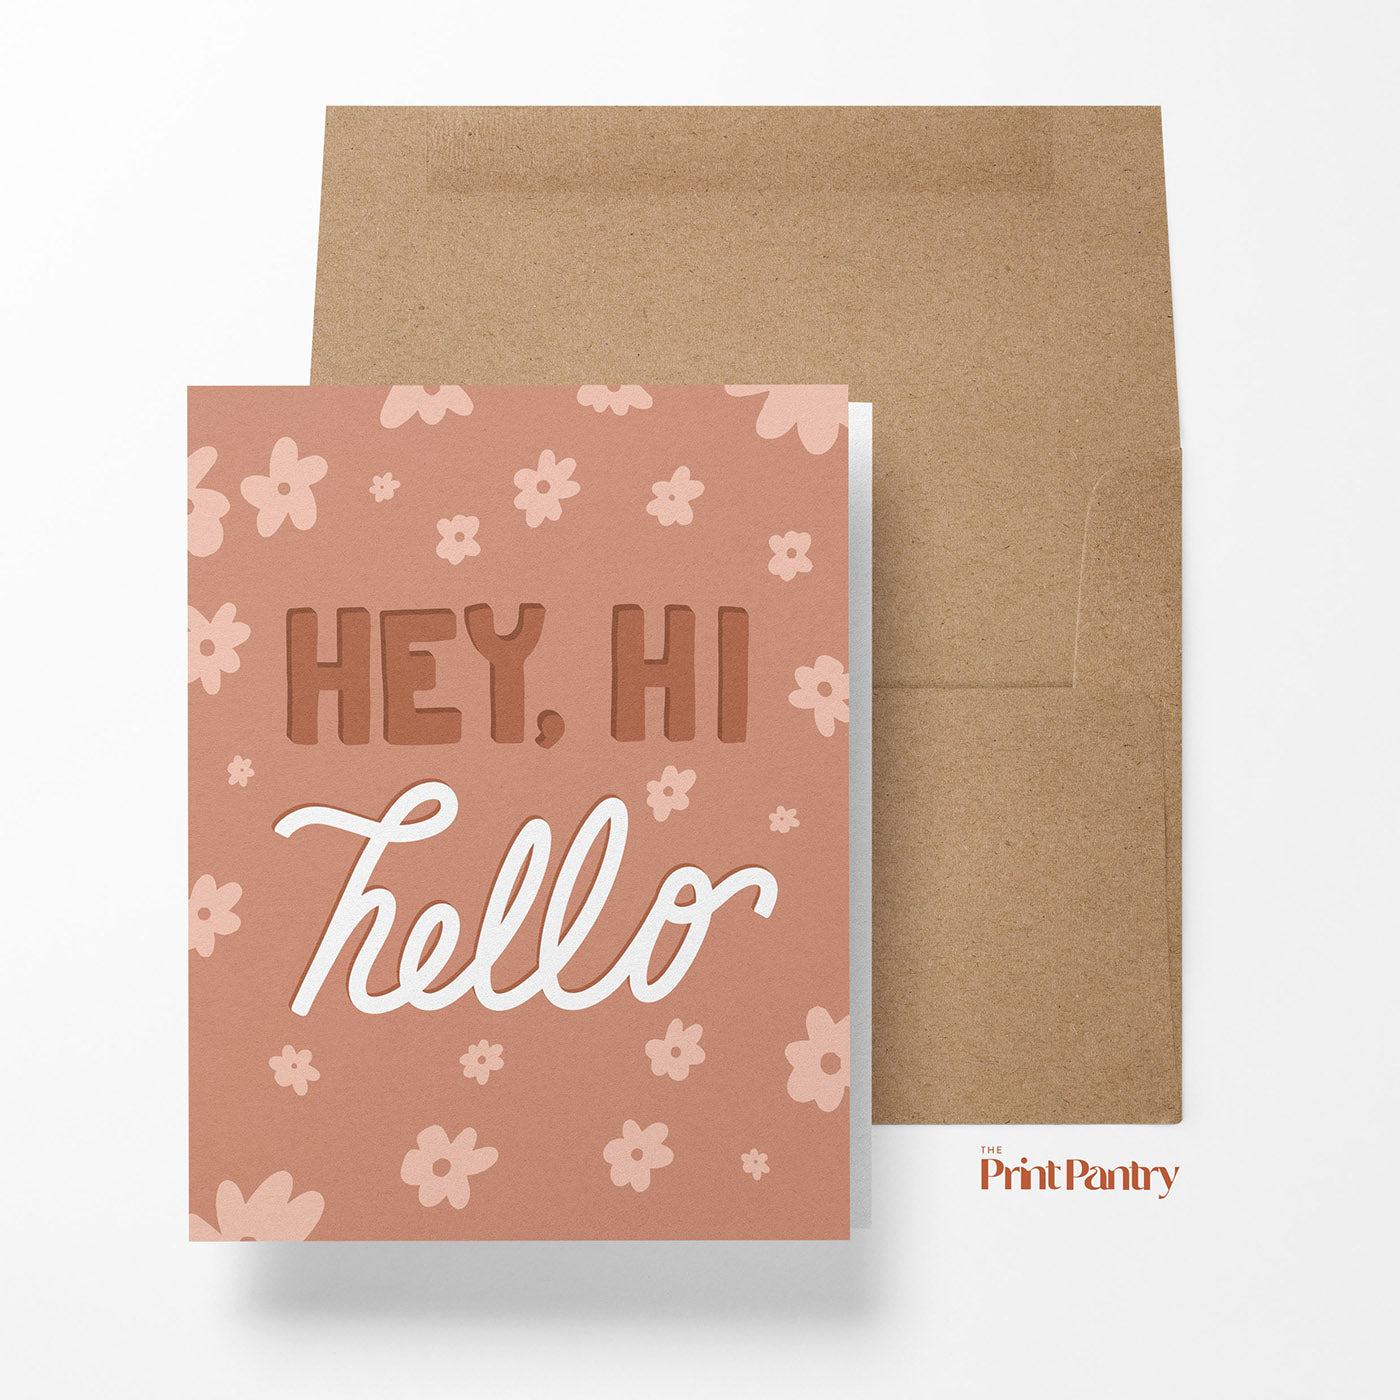 Load image into Gallery viewer, Hey, Hi, Hello Greeting Card laying on an open Kraft paper envelope
